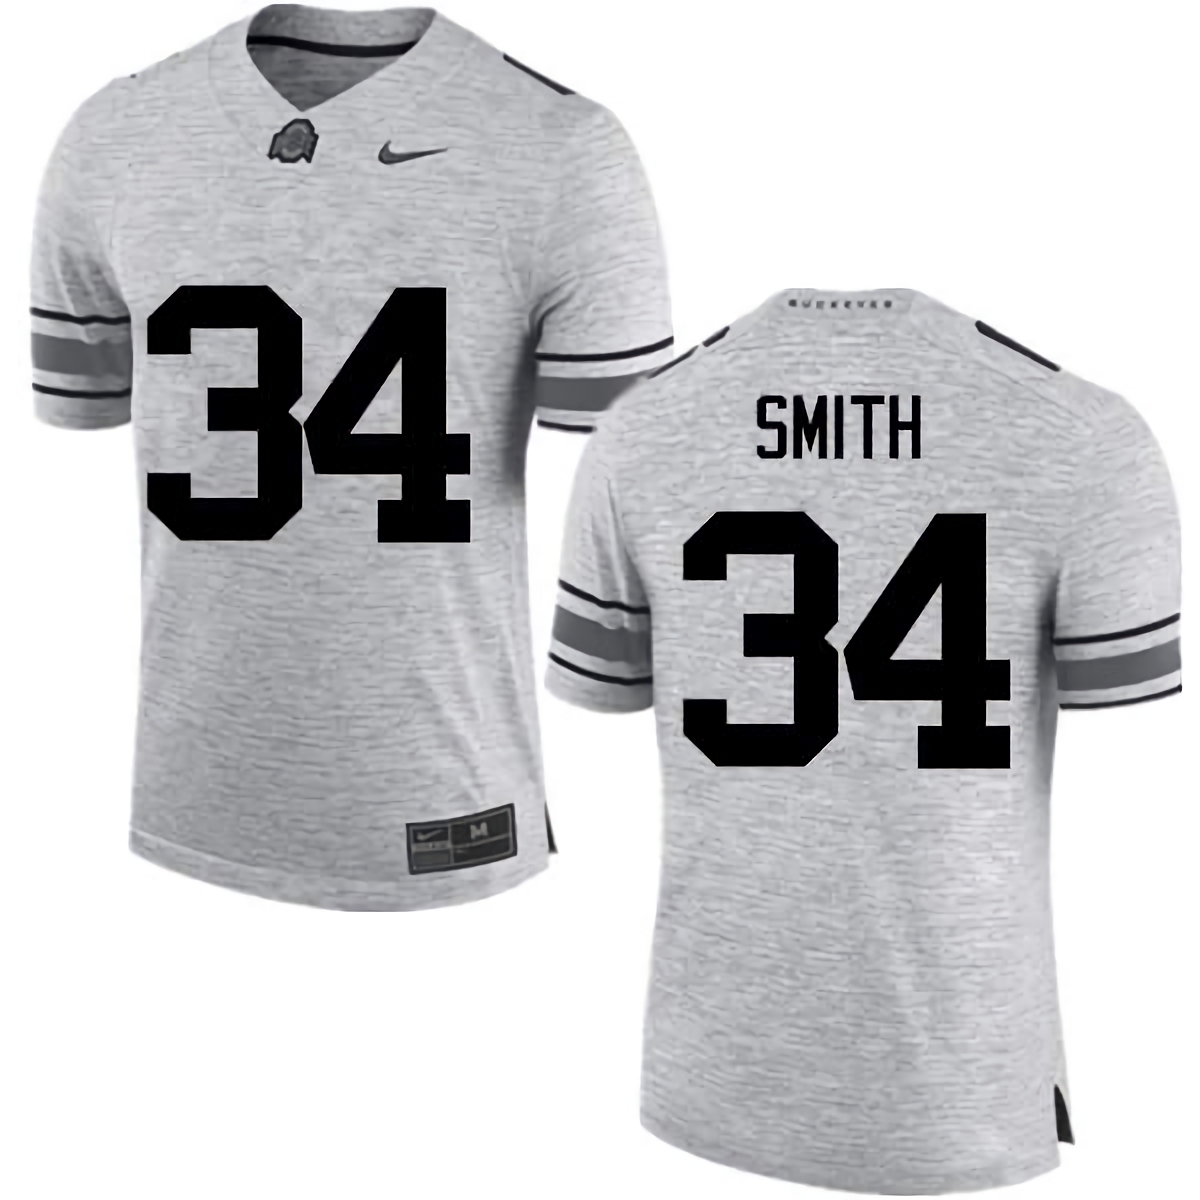 Erick Smith Ohio State Buckeyes Men's NCAA #34 Nike Gray College Stitched Football Jersey BCI2556TP